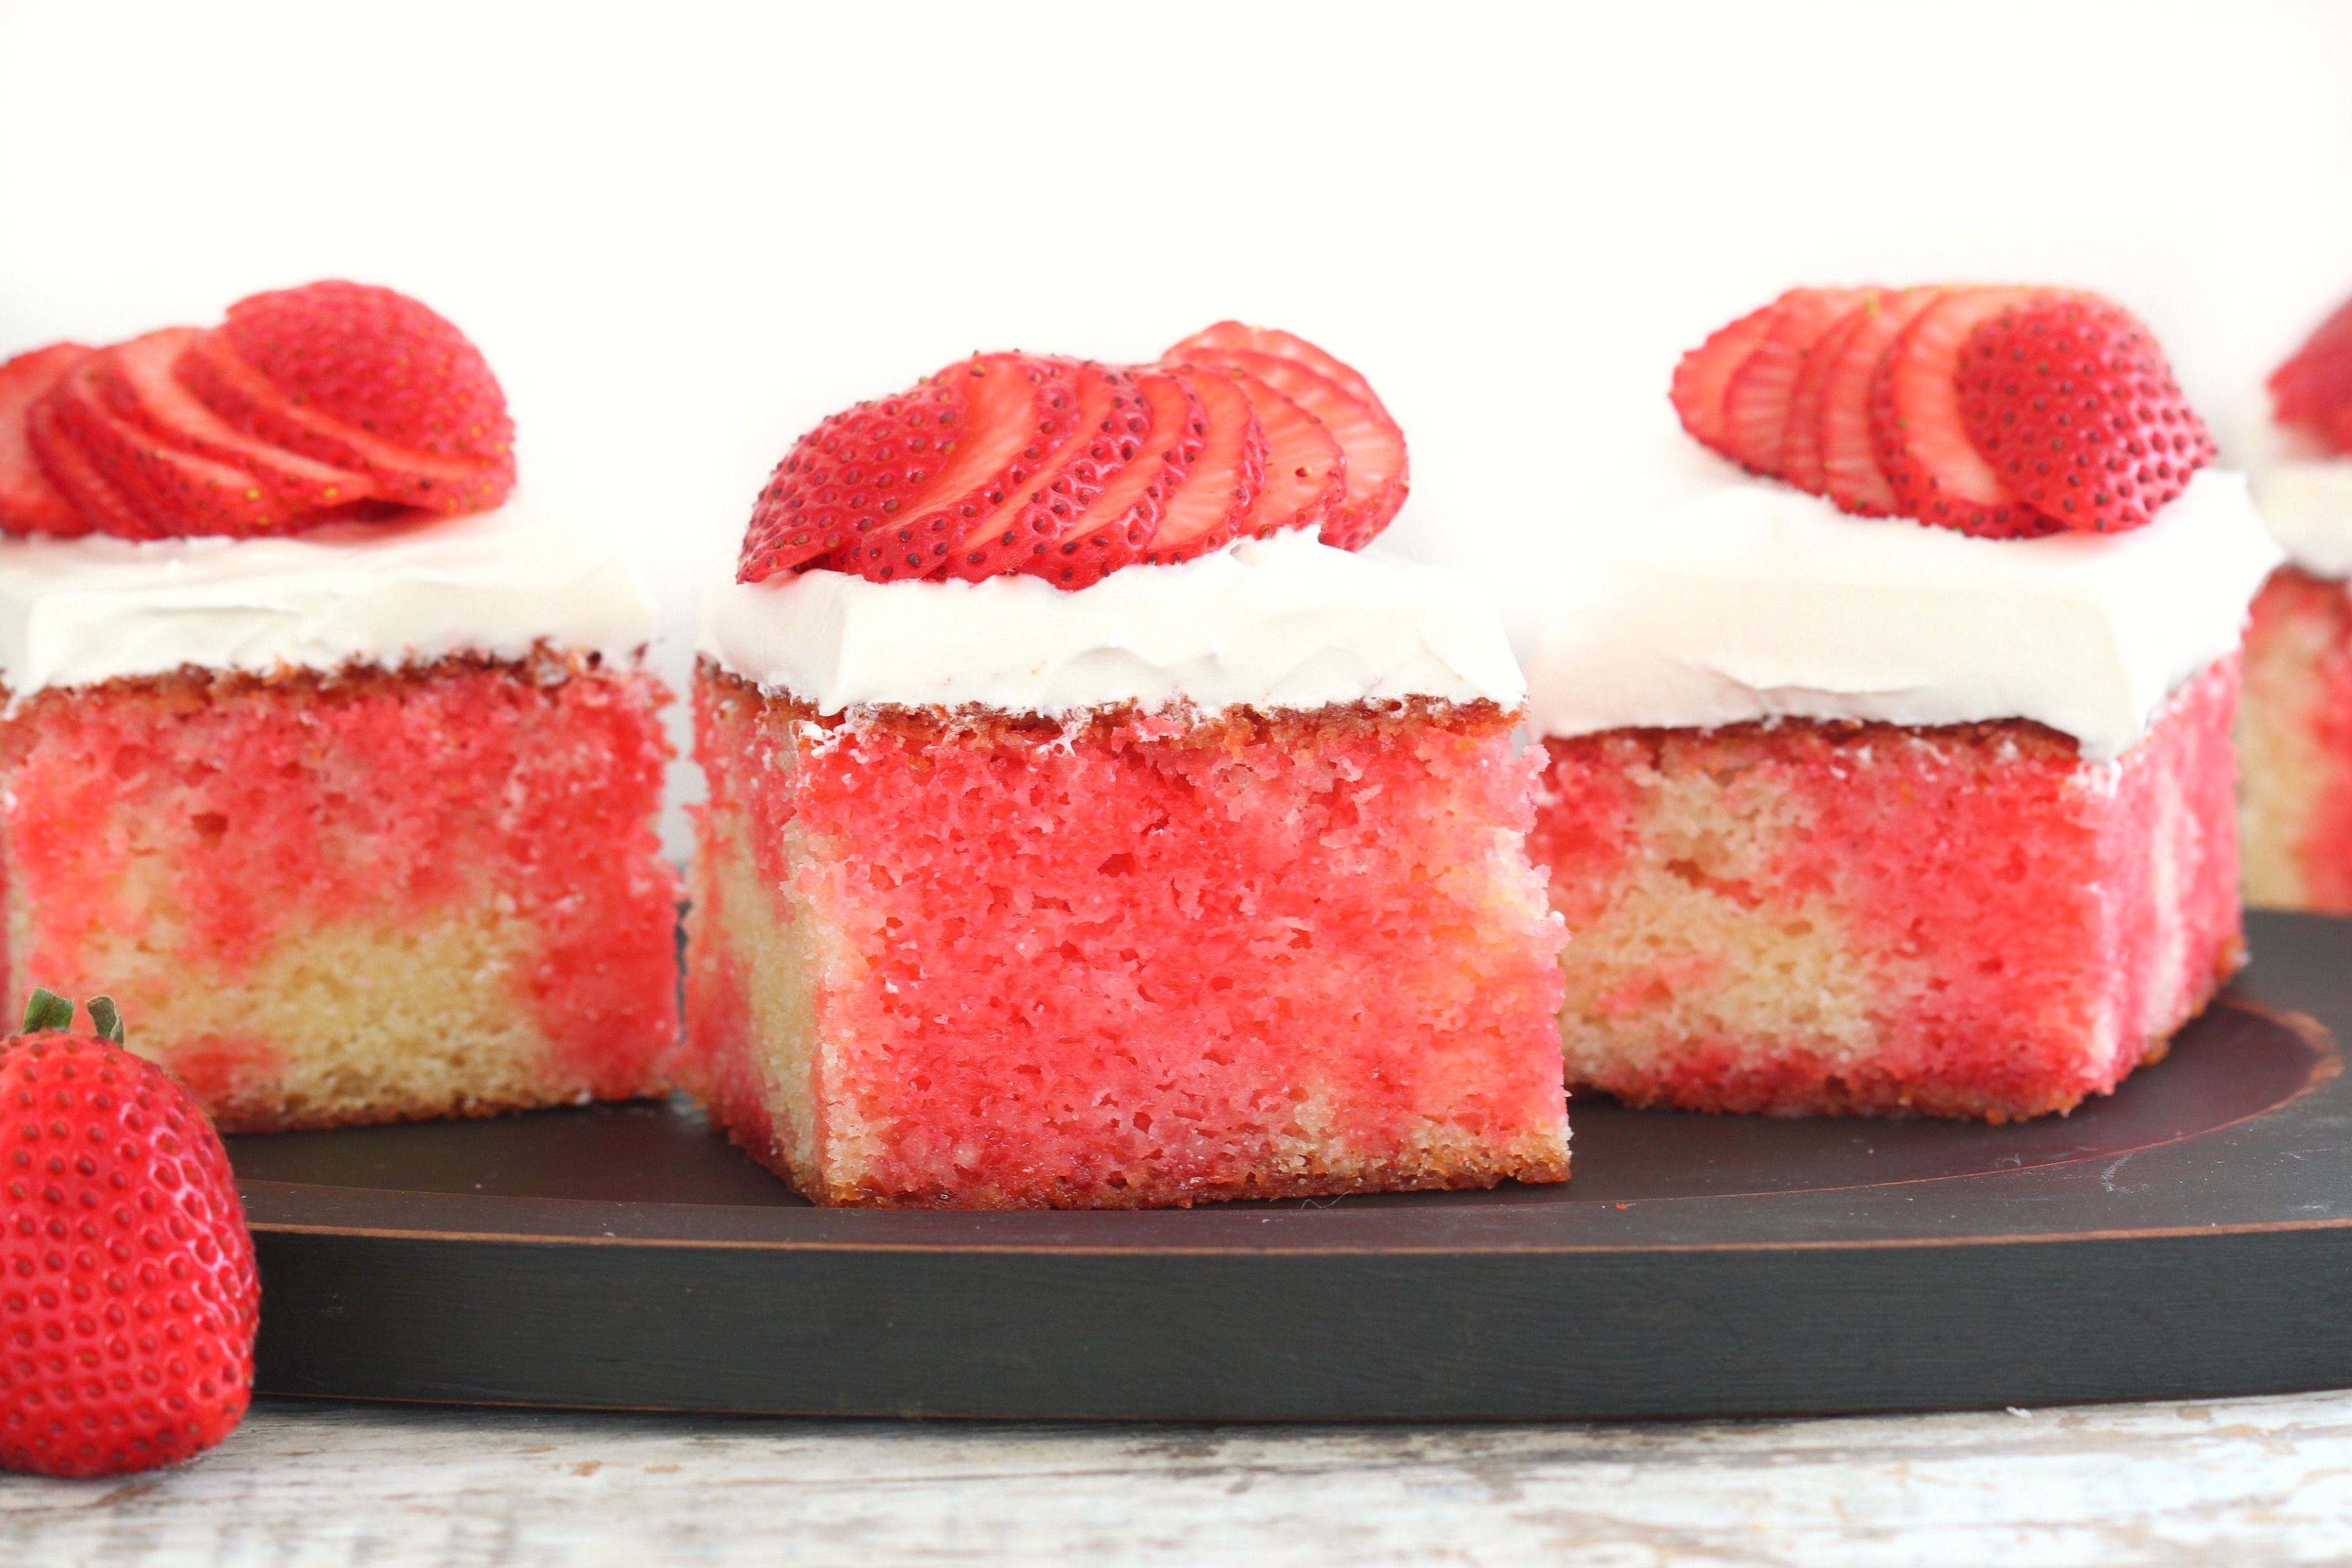 With its pretty red stripes, this made-from-scratch poke cake drenched in s...